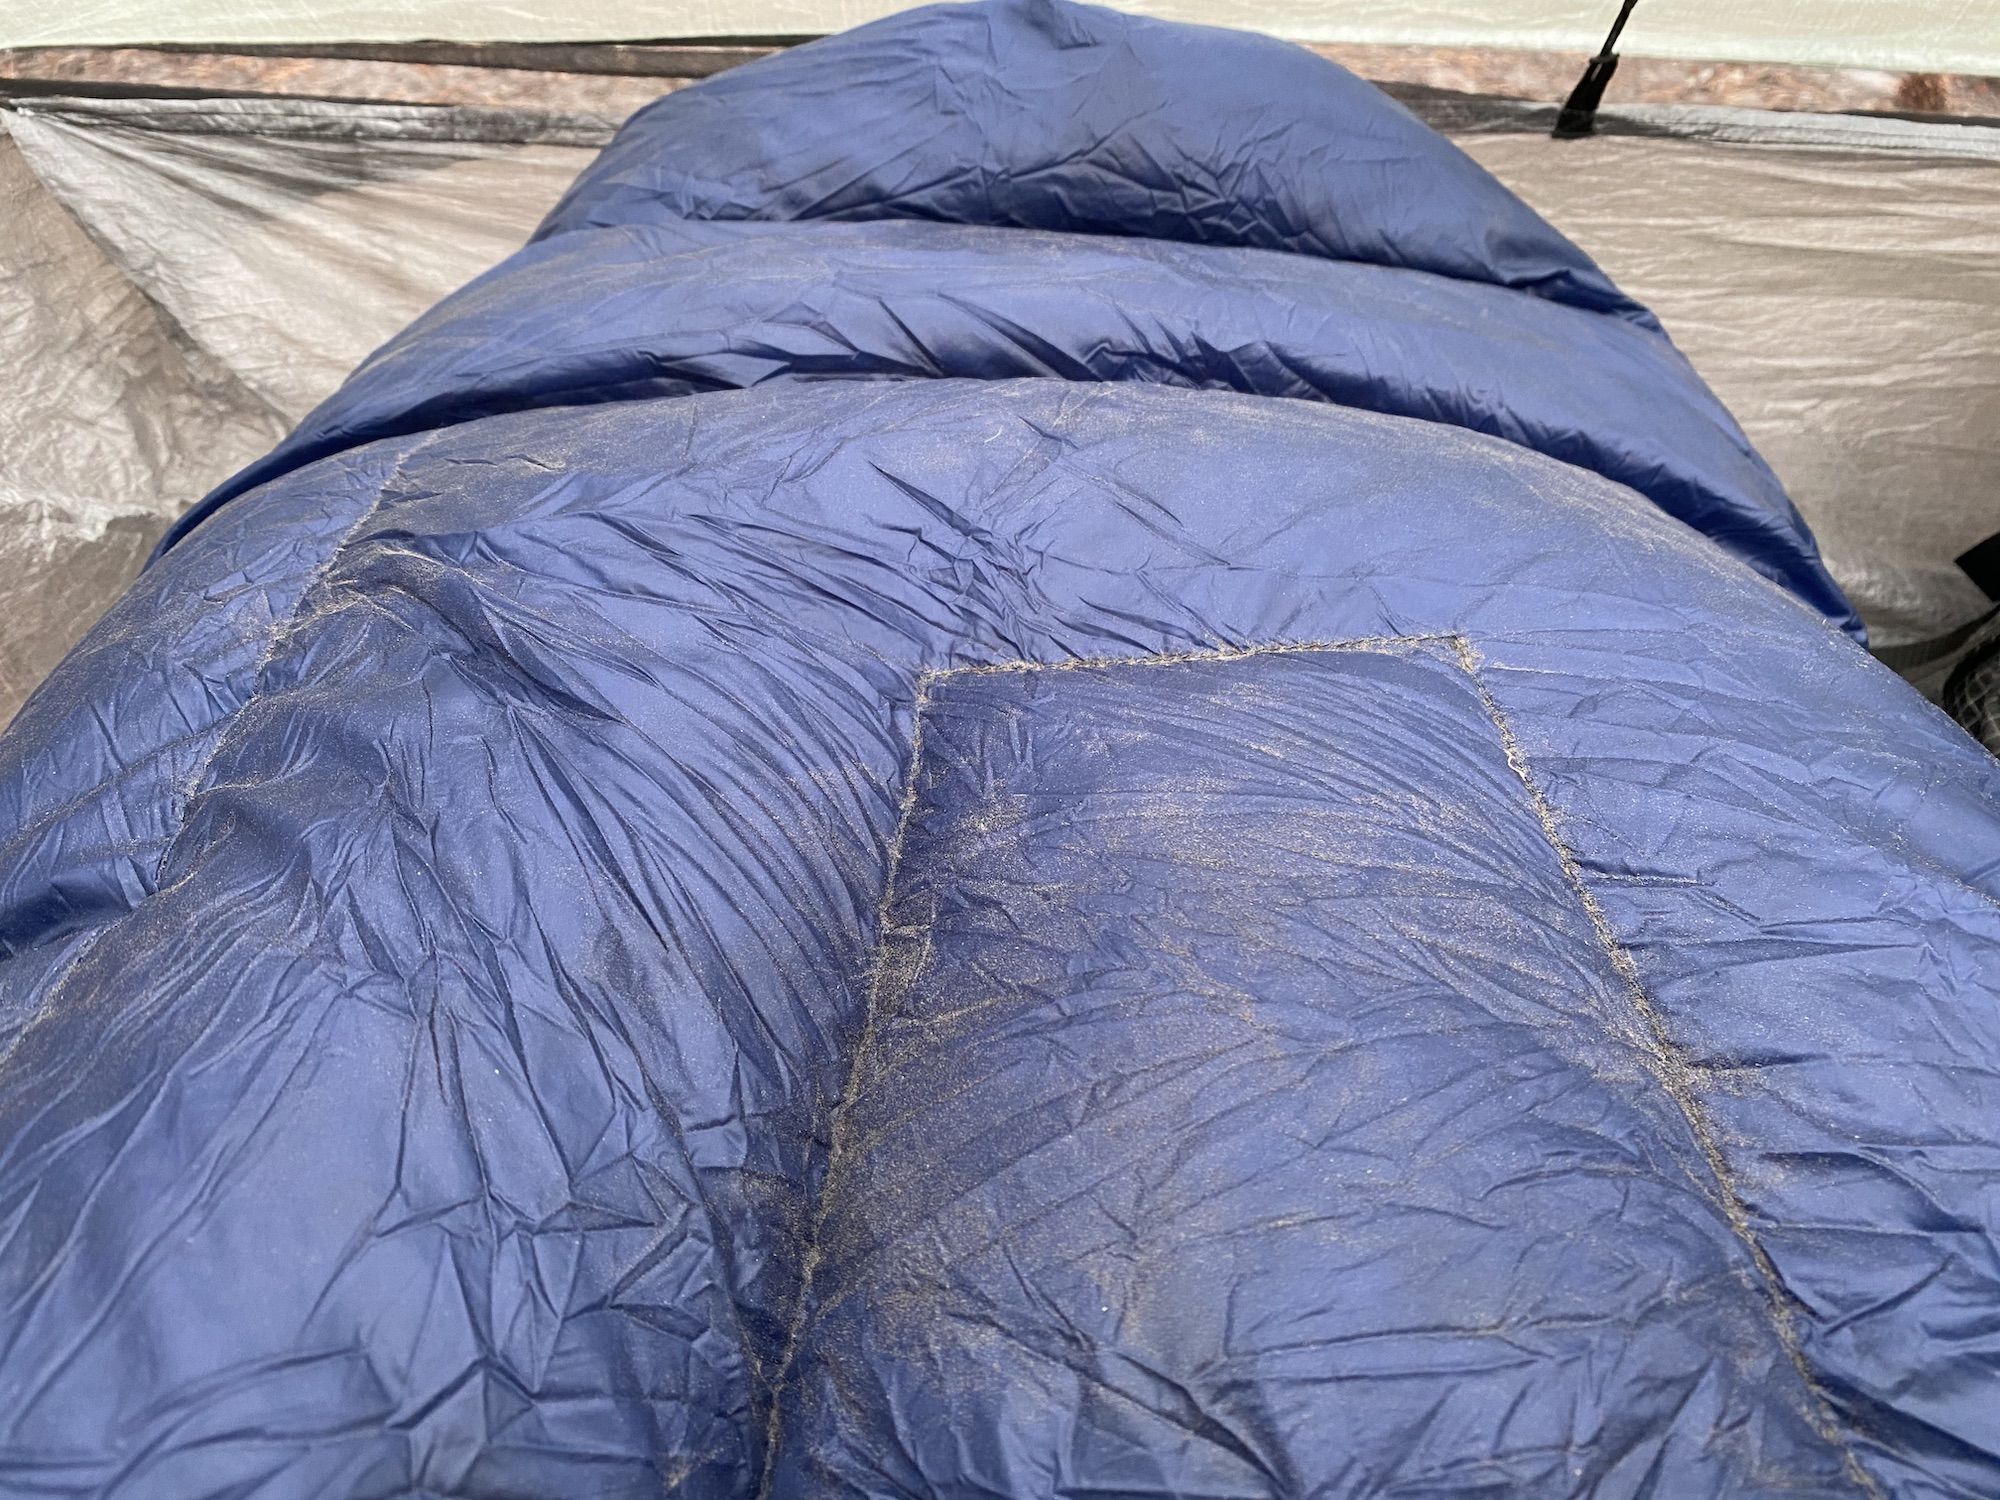 A layer of dust on a sleeping bag